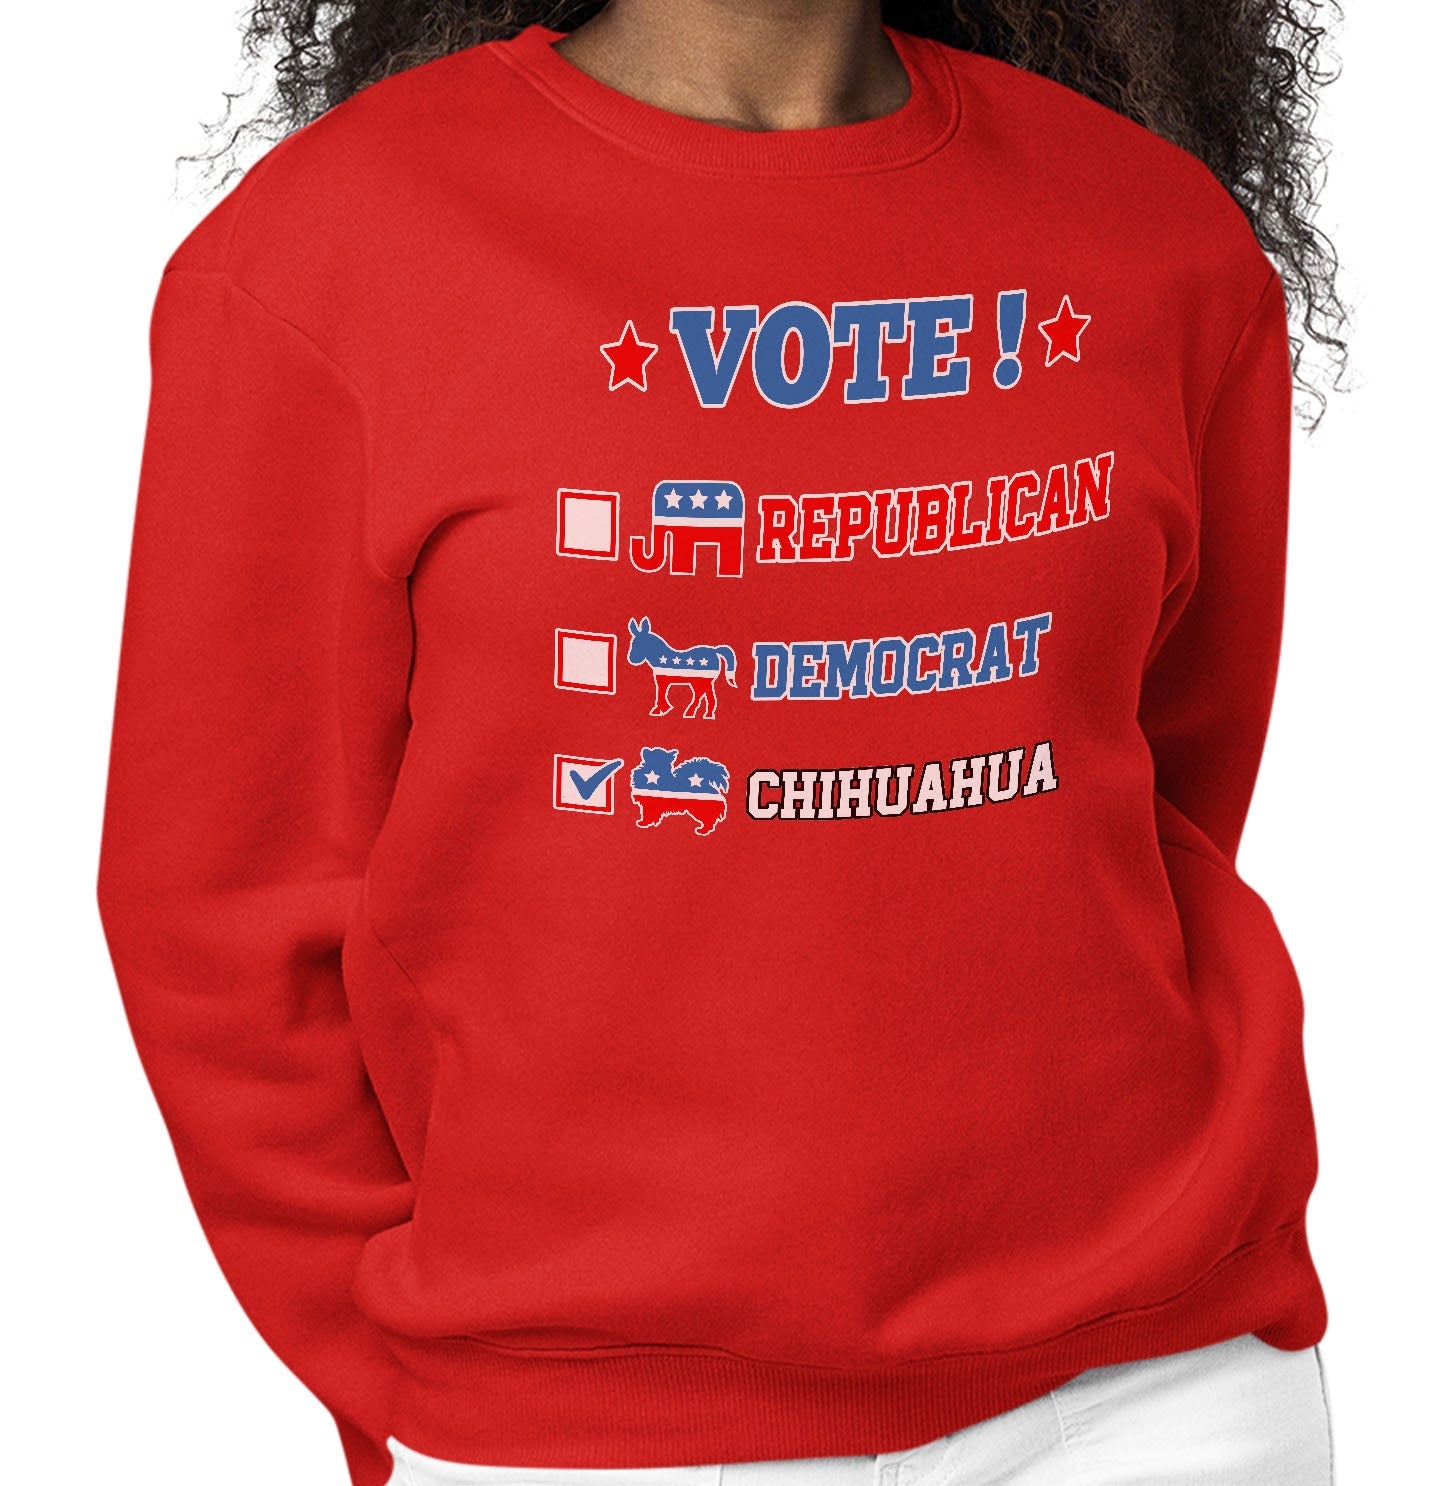 Vote for the Chihuahua (Long-Haired) - Adult Unisex Crewneck Sweatshirt